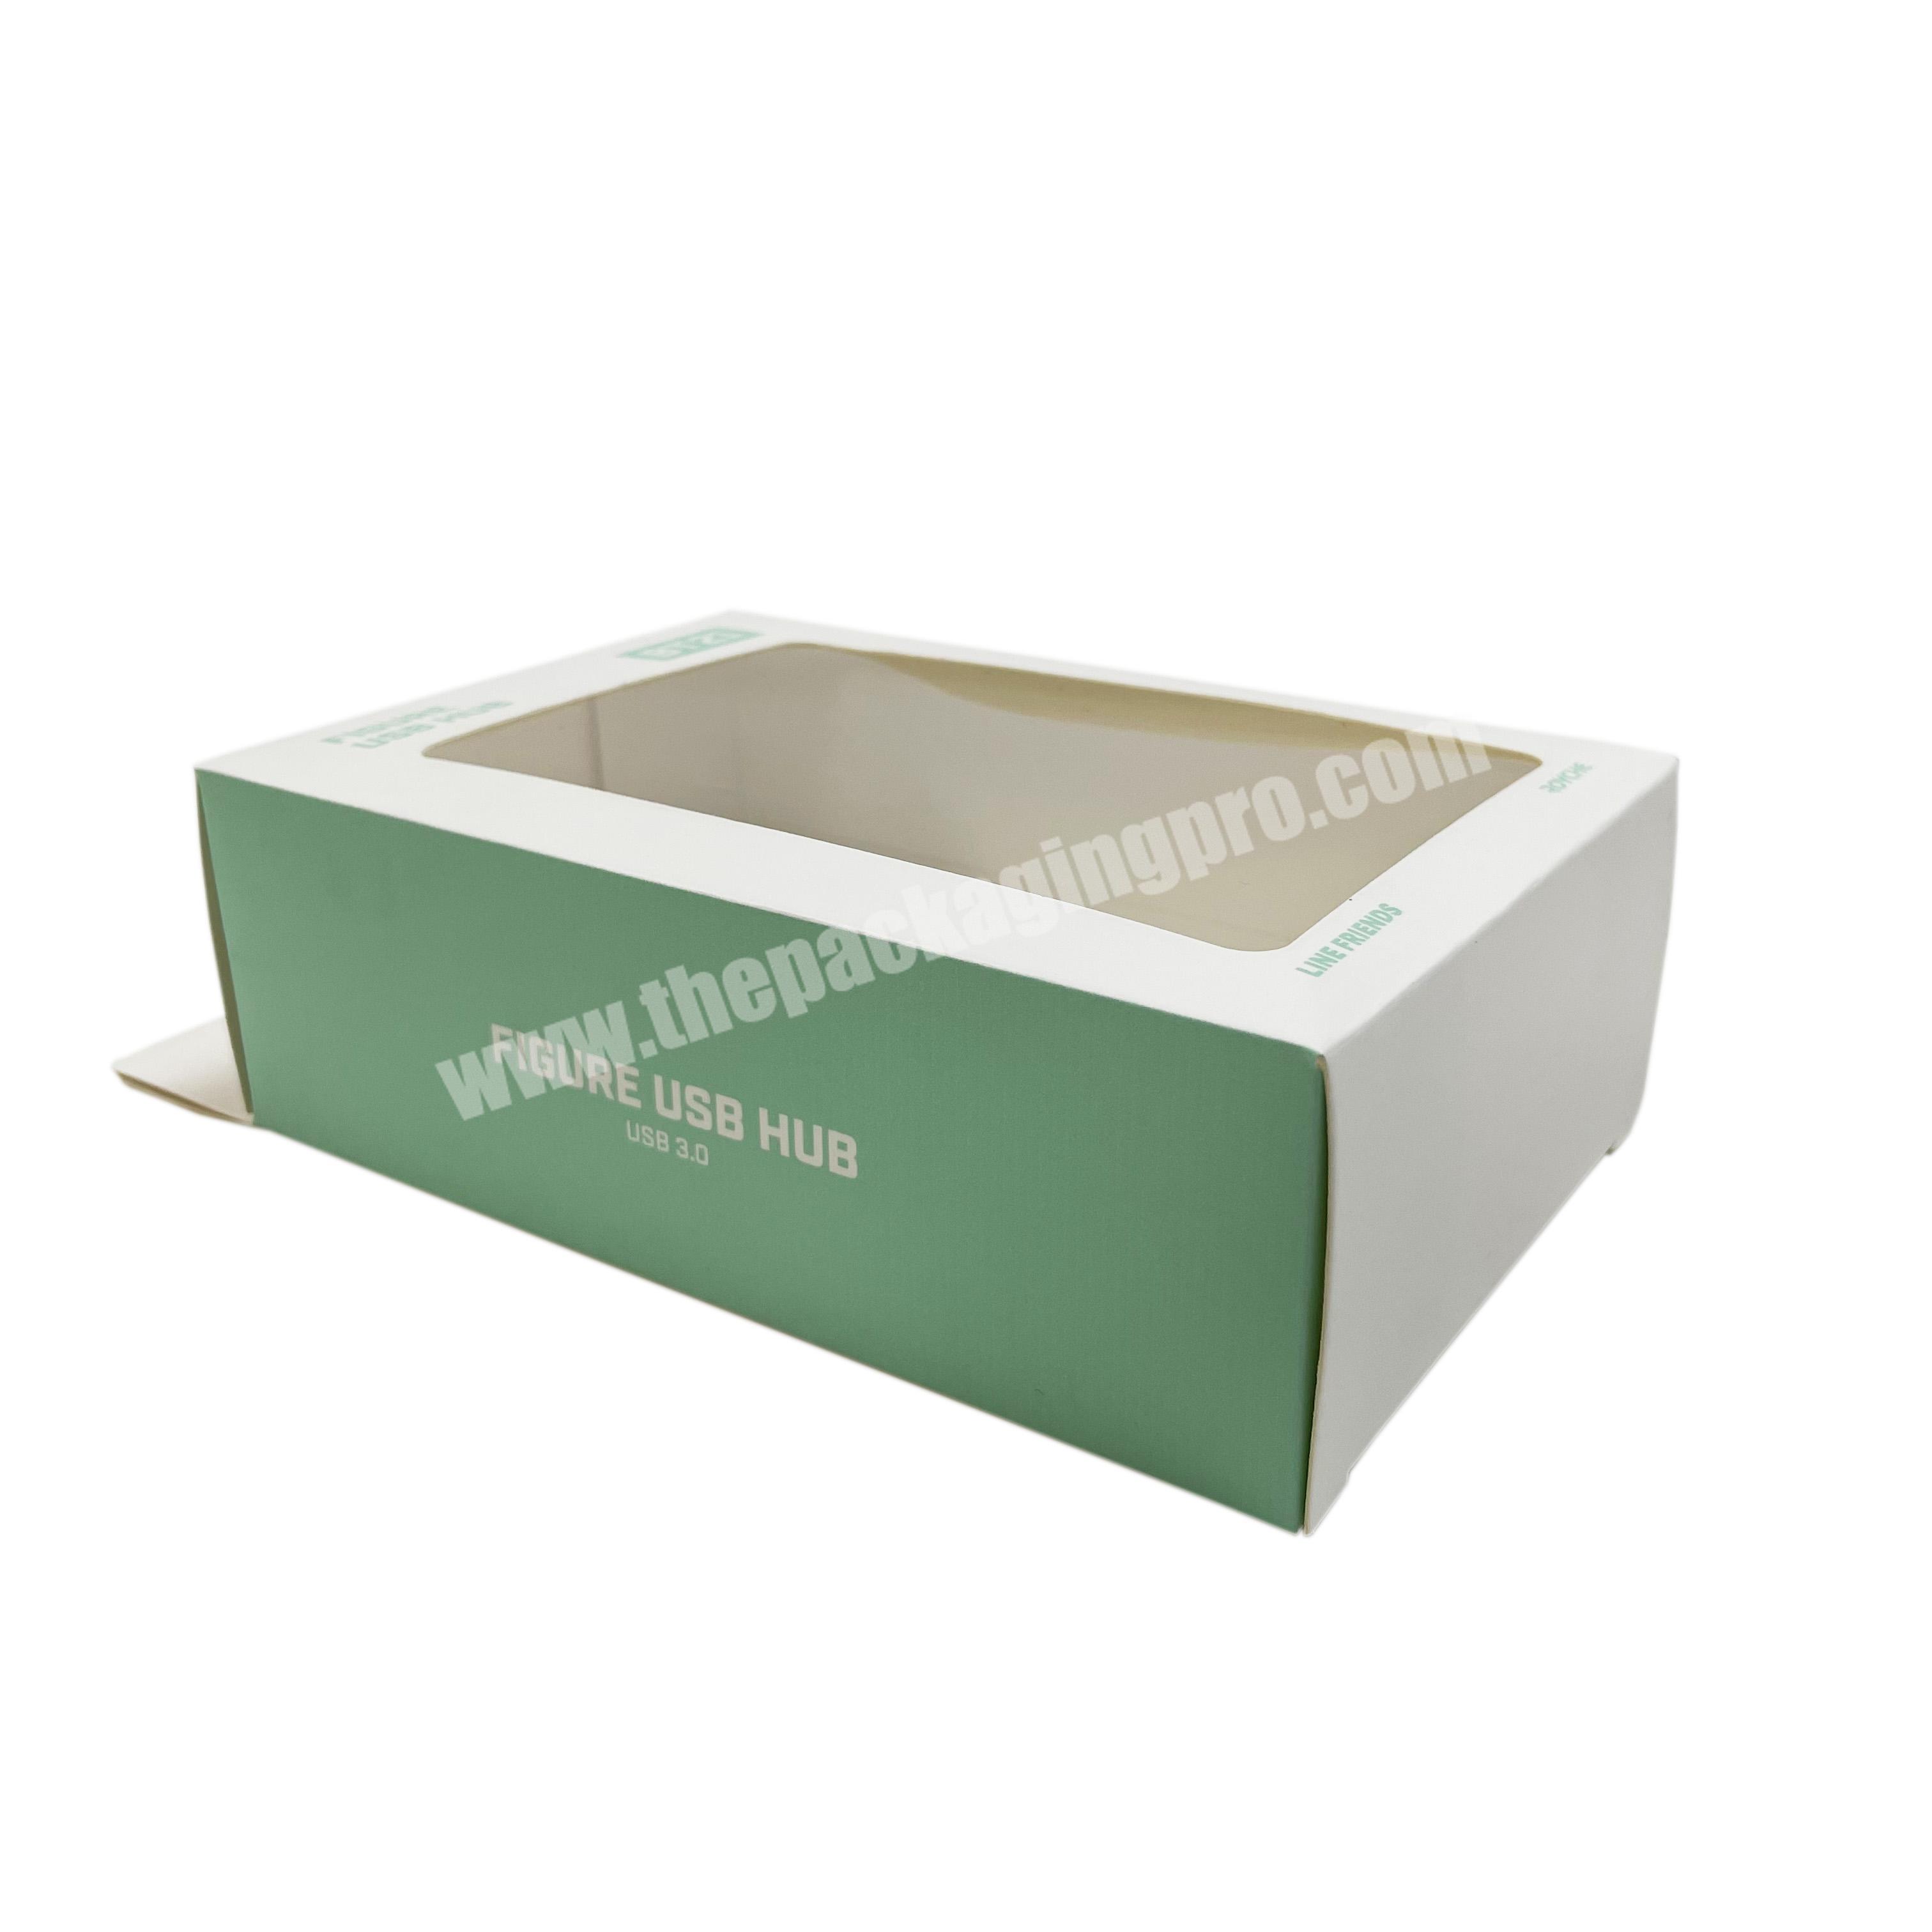 Wholesale Garment Clothing underwear Shipping custom gift boxes packaging box custom boxes